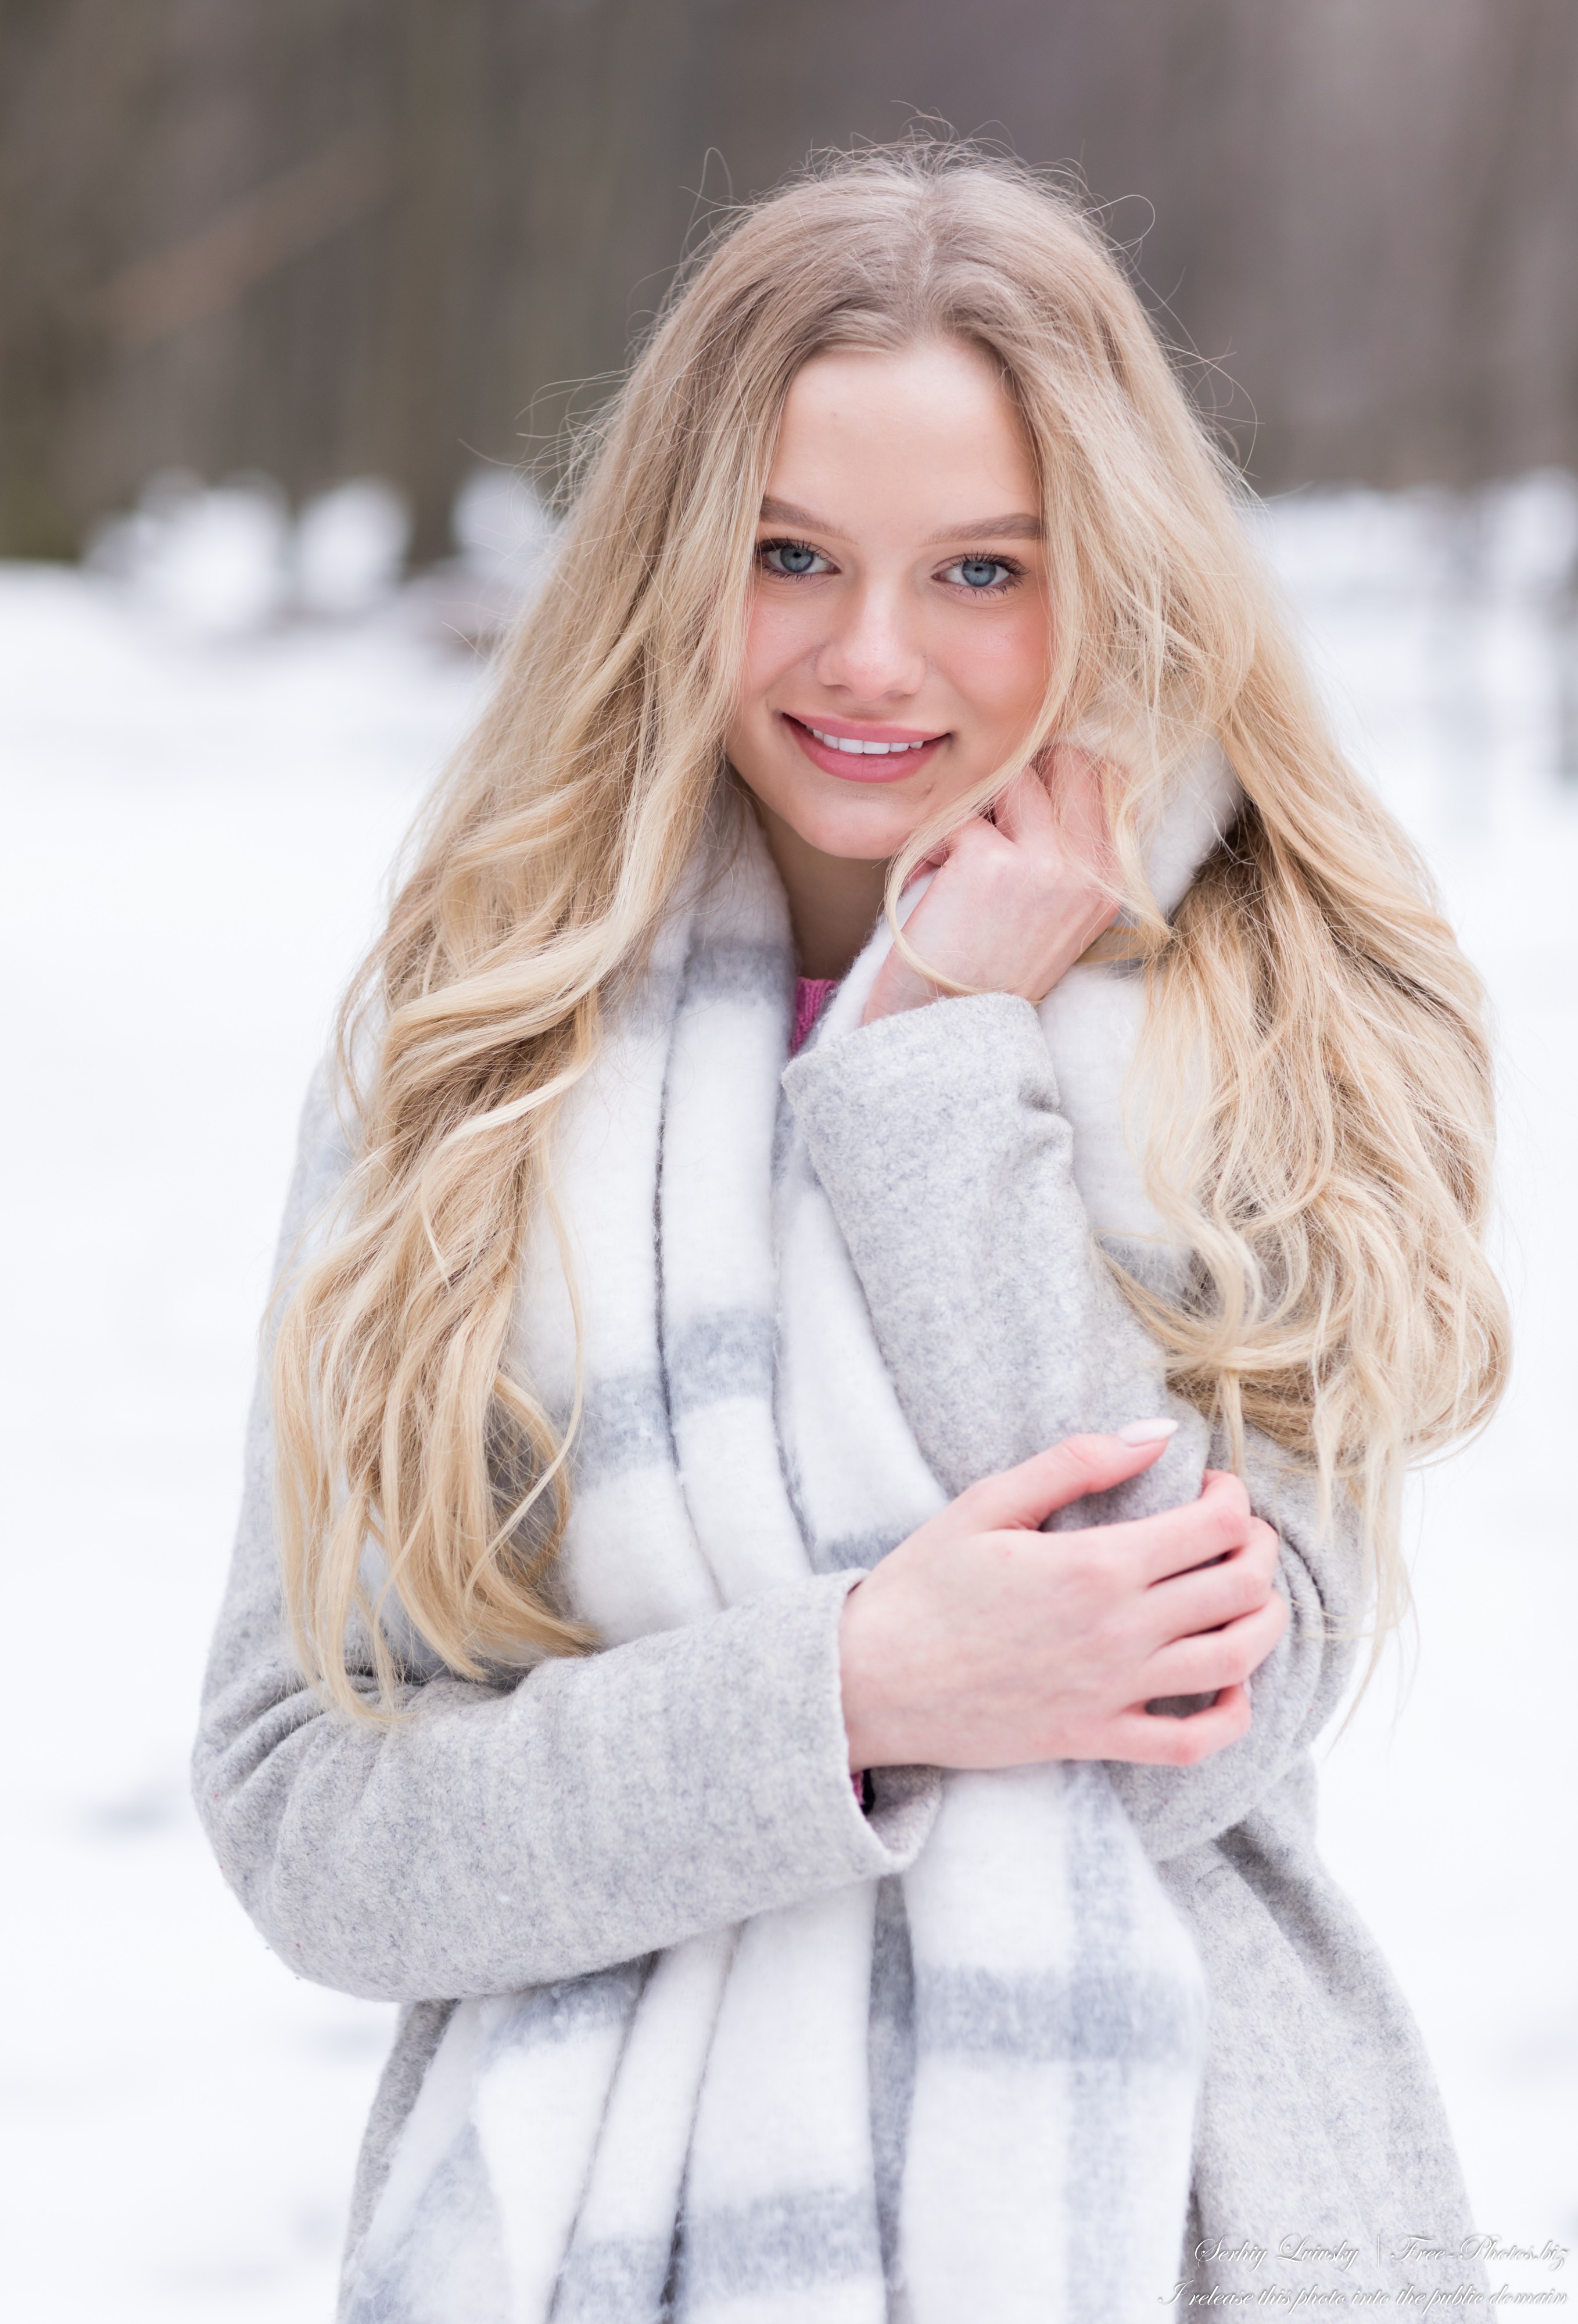 Oksana - a 19-year-old natural blonde girl photographed by Serhiy Lvivsky in March 2021, picture 36